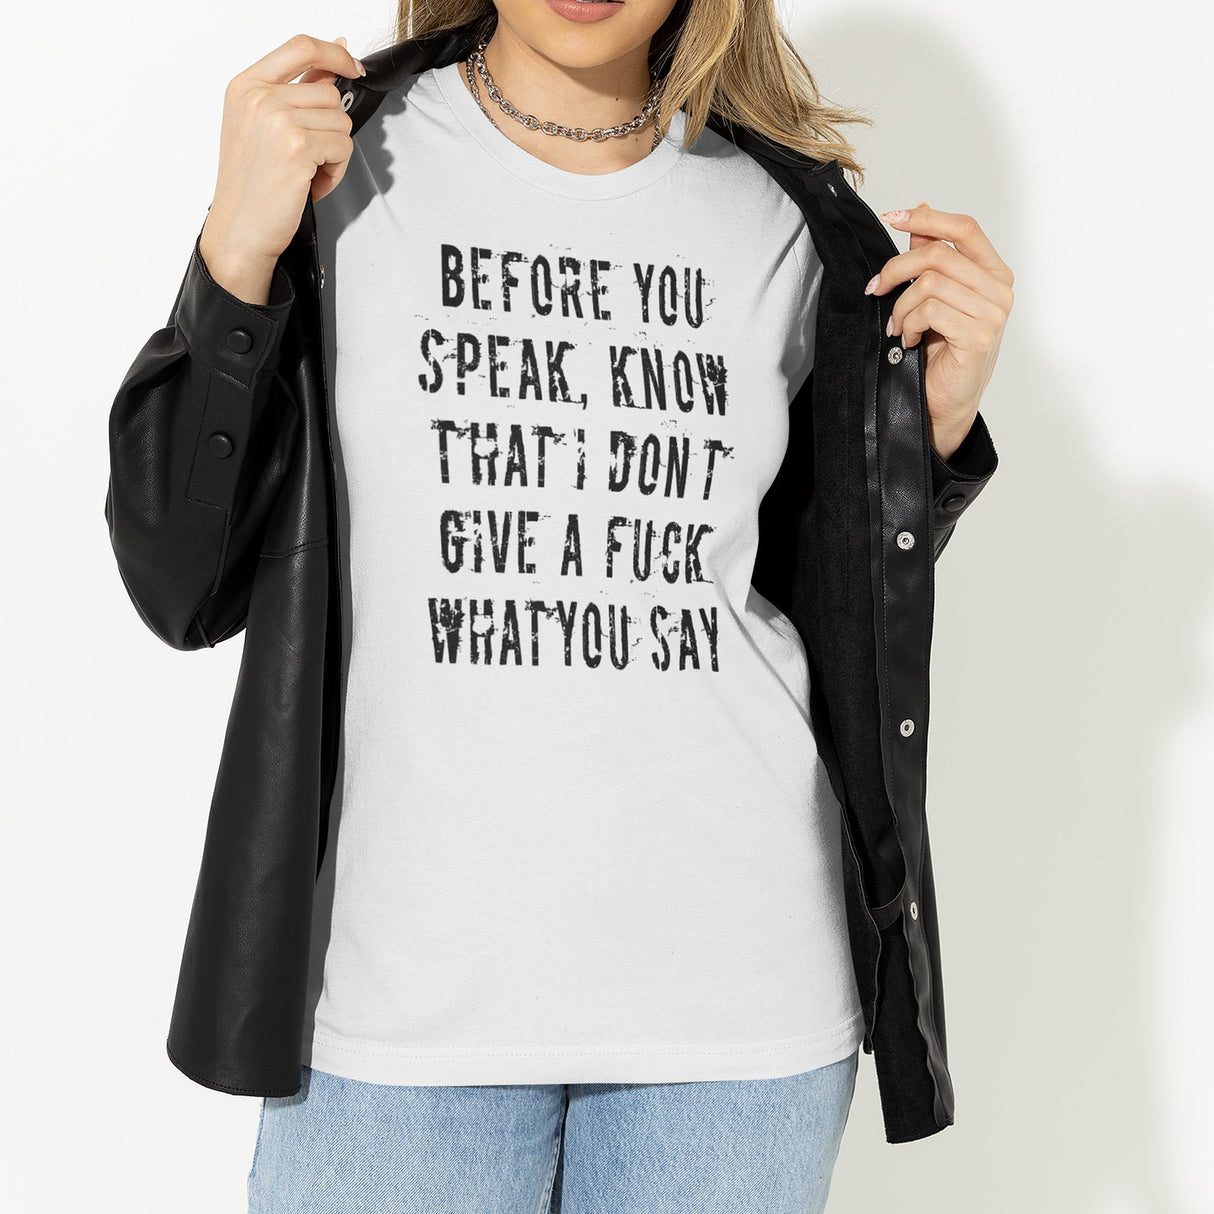 before-you-speak-know-that-i-dont-give-a-fuck-what-you-say-fuck-tee-life-t-shirt-arrogant-tee-t-shirt-tee#color_white